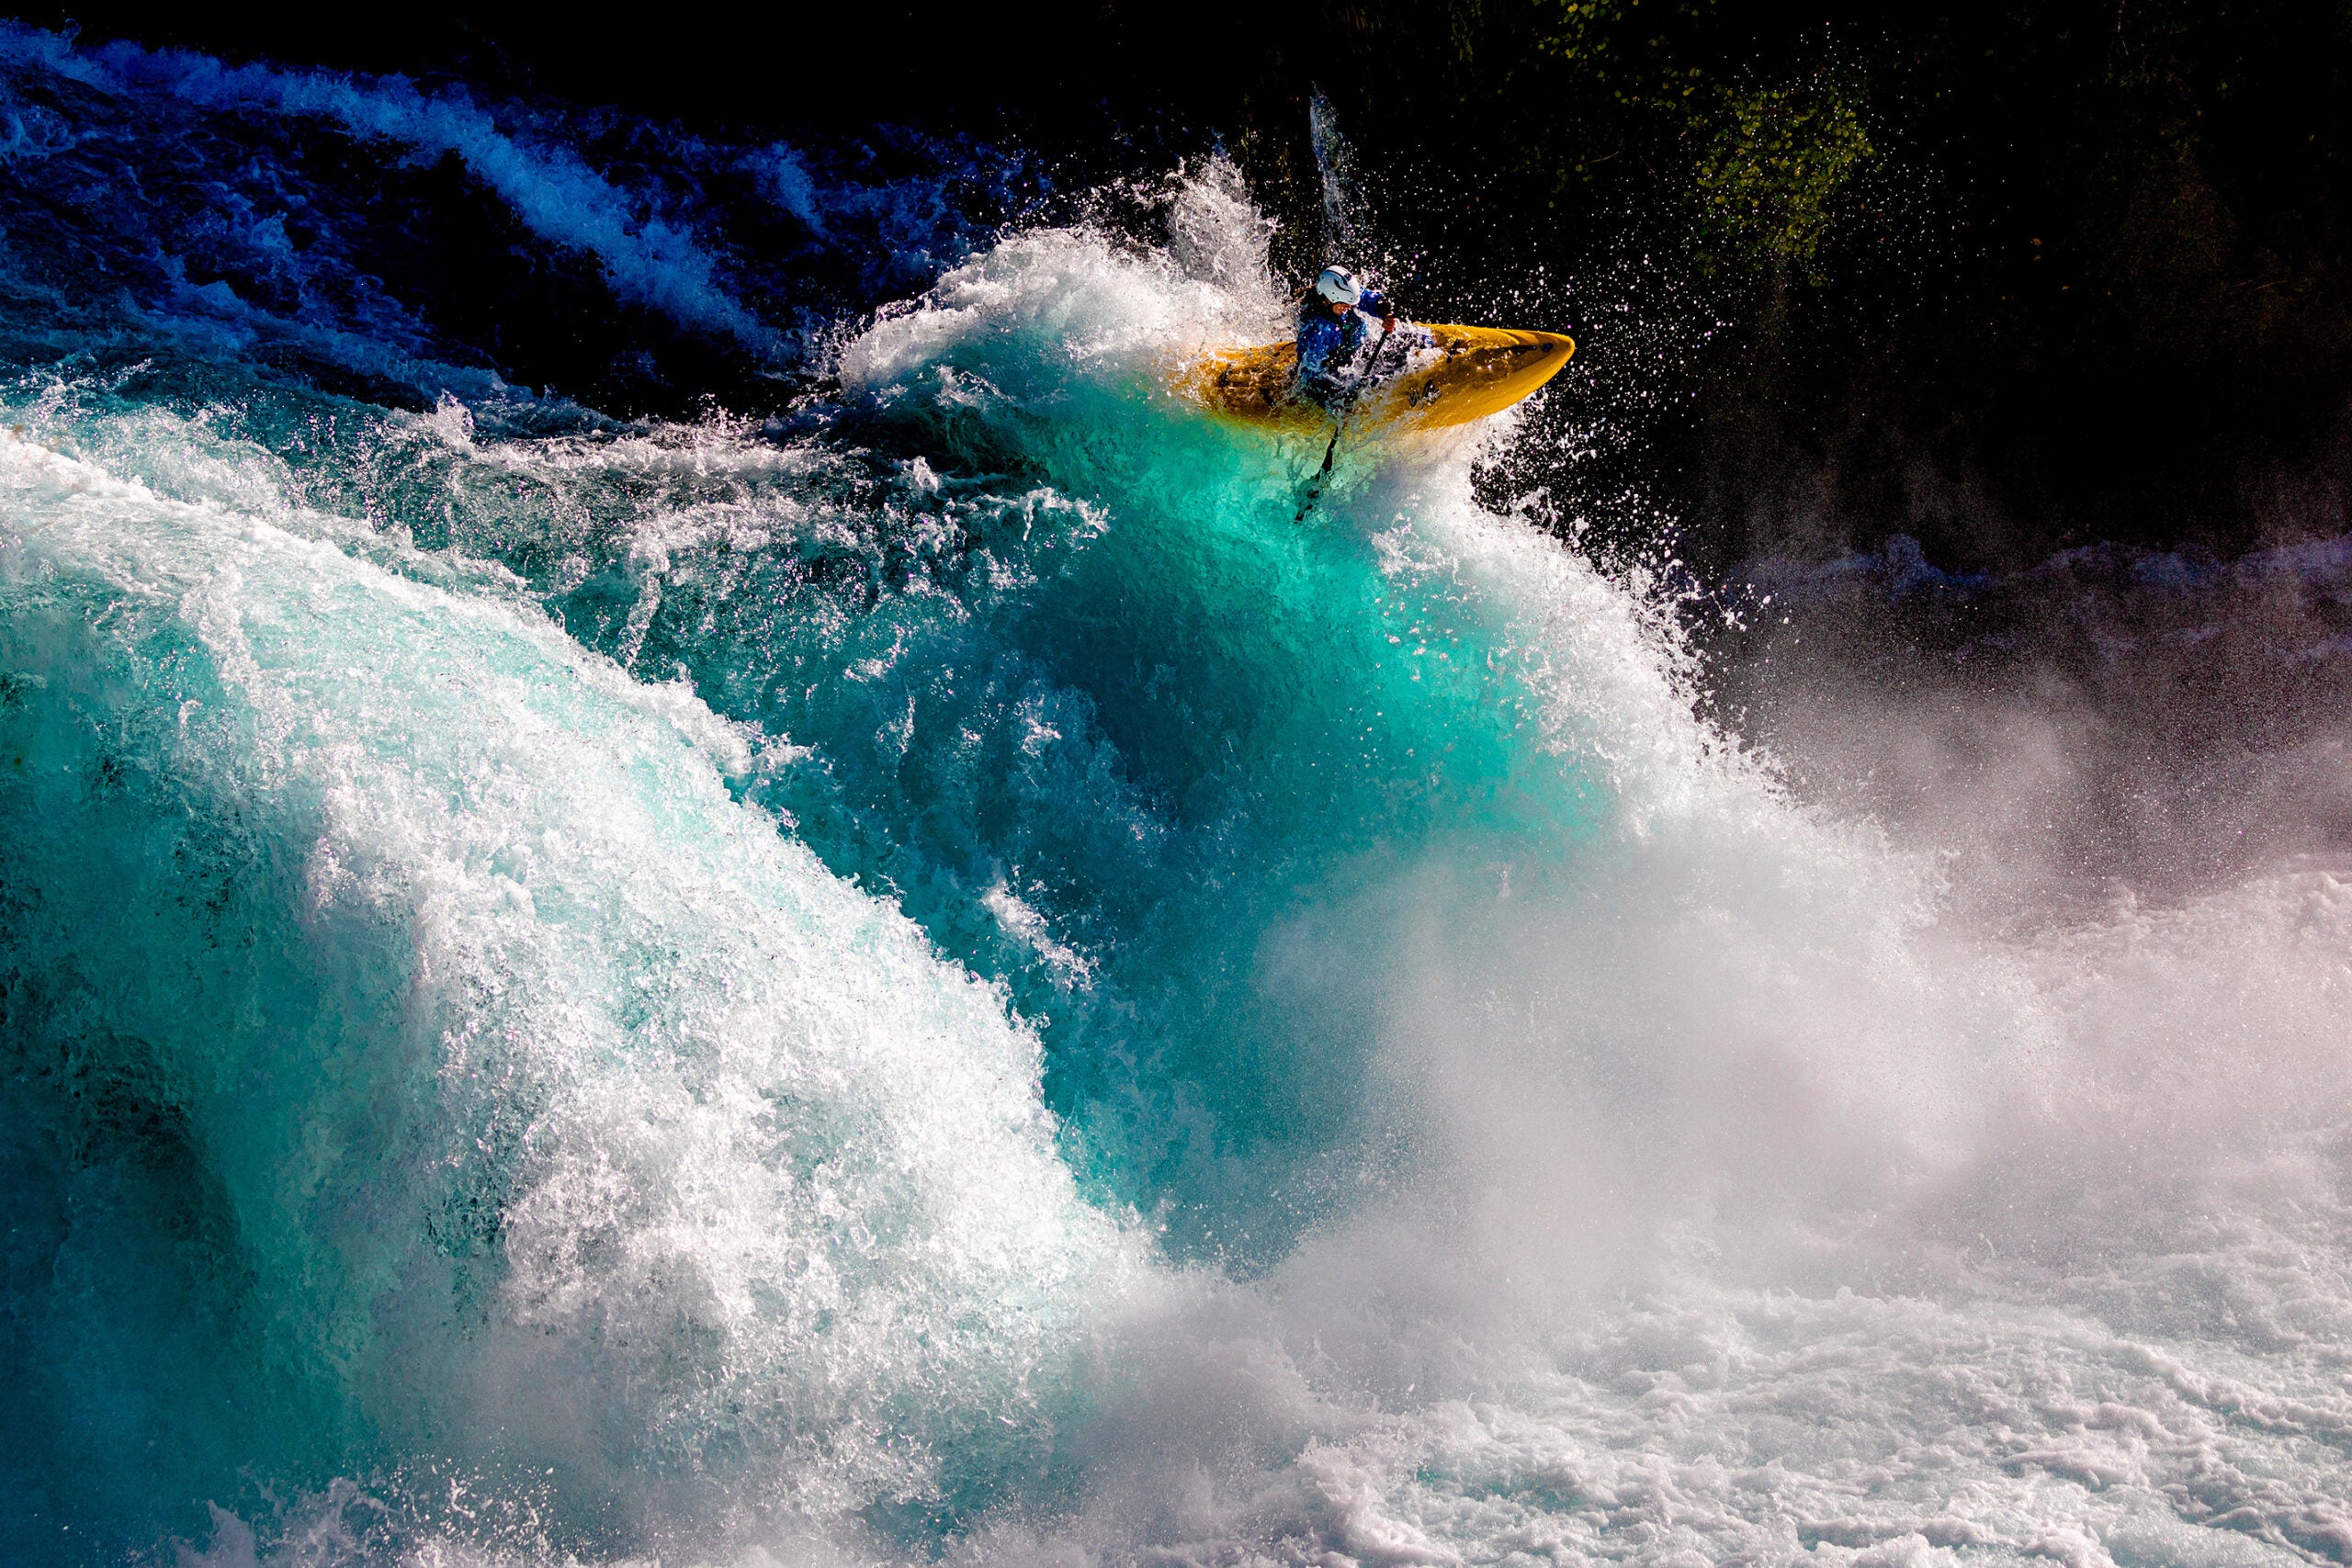 New Zealand photographer Rod Hill won in the Energy category for his photo, titled “Huka Falls,” which shows kayaker River Mutton dramatically emerging from a rapid at Huka Falls in New Zealand.